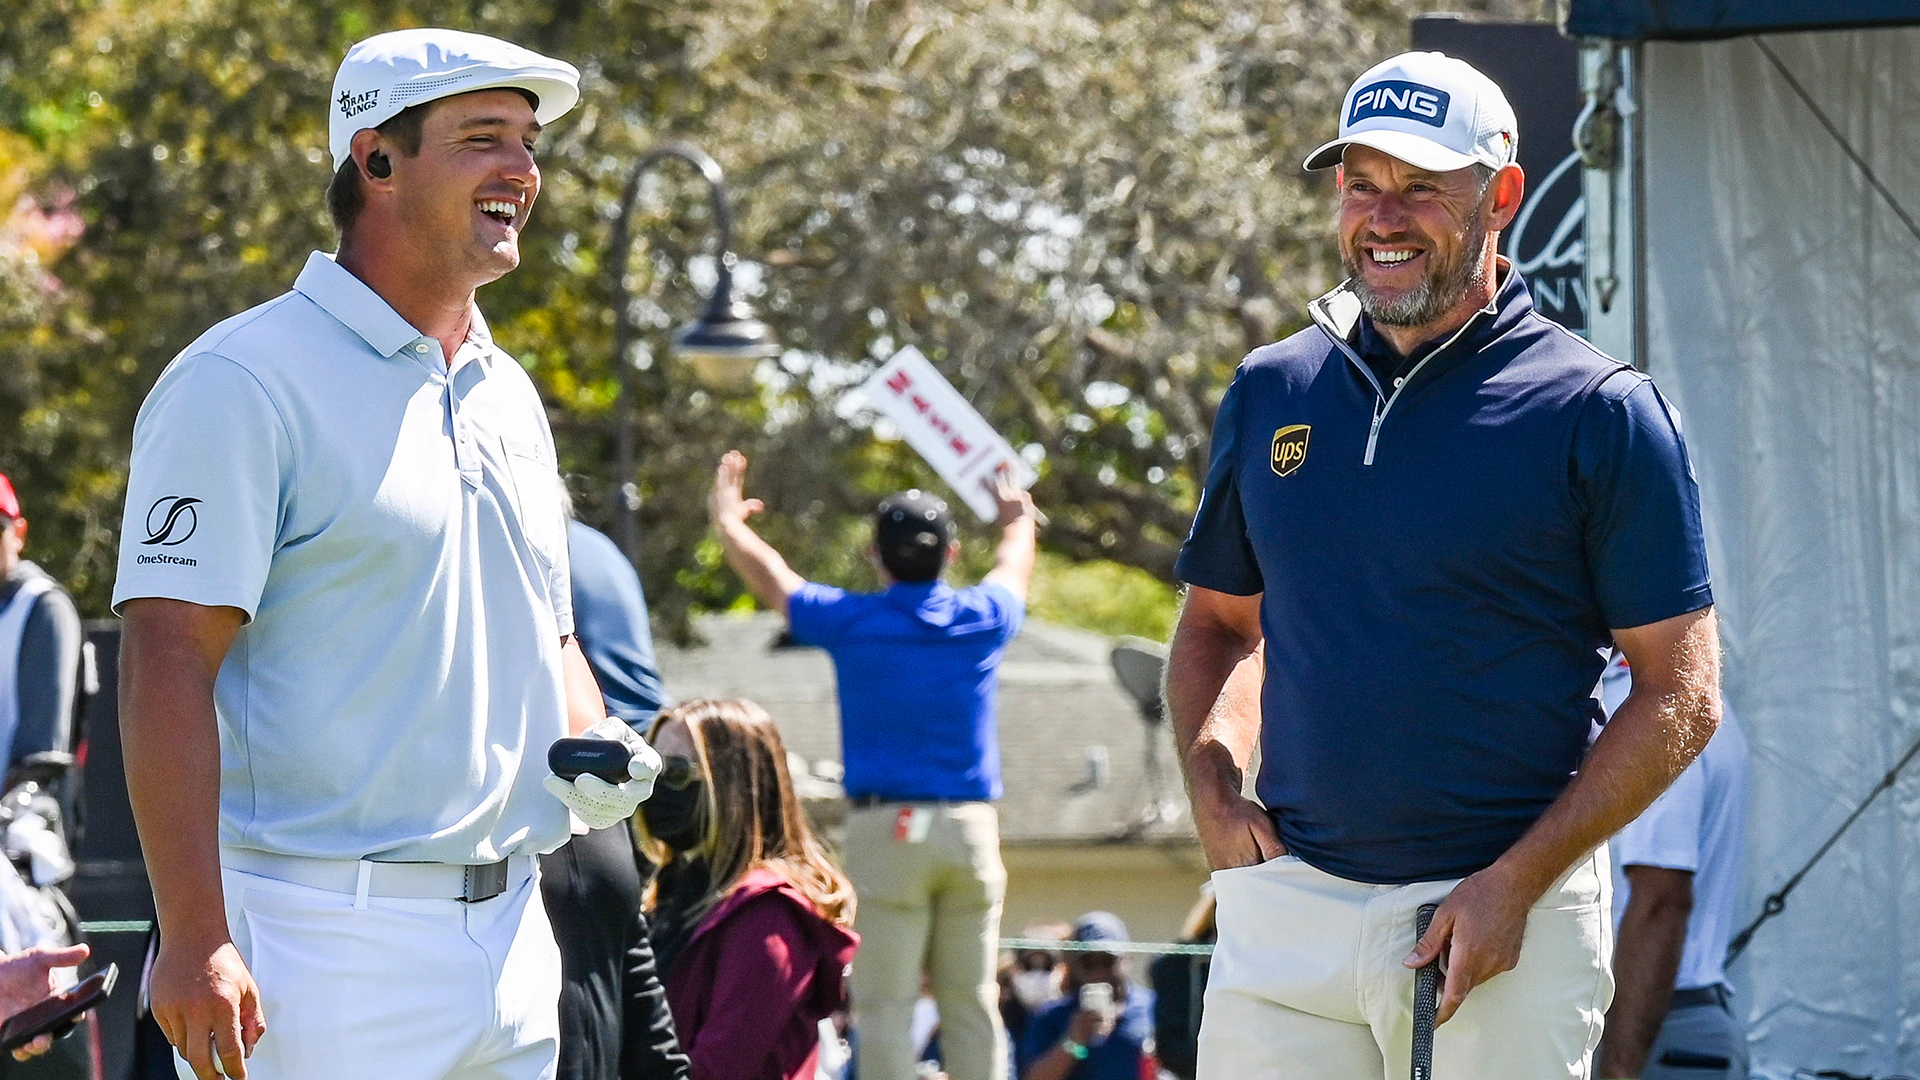 The Players odds: Lee Westwood, Bryson DeChambeau co-favorites after 54 holes